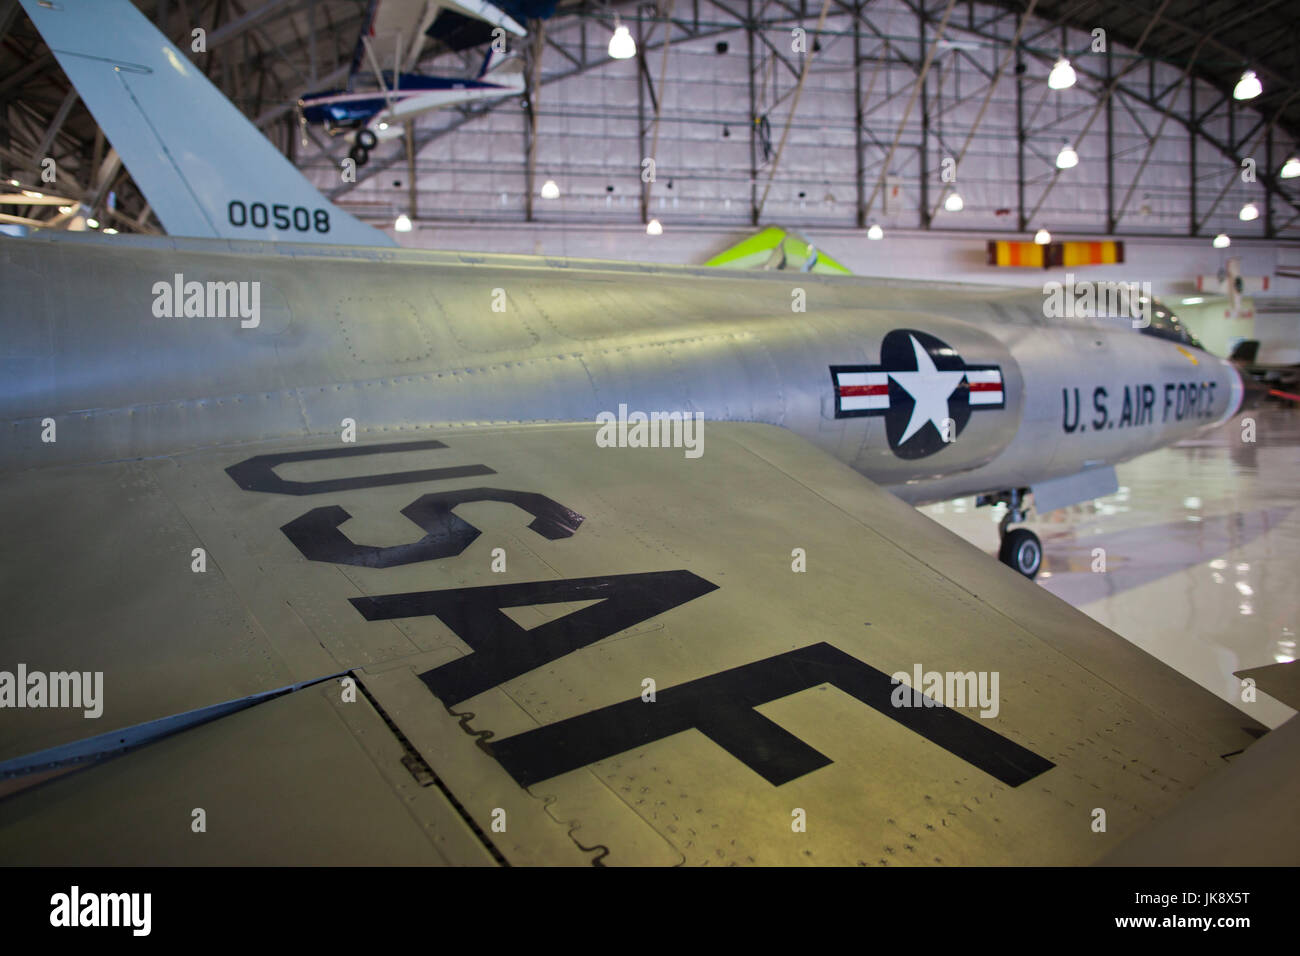 USA, Colorado, Denver, Wings over the Rockies, Air and Space Museum, F-104 Starfighter, detail Stock Photo